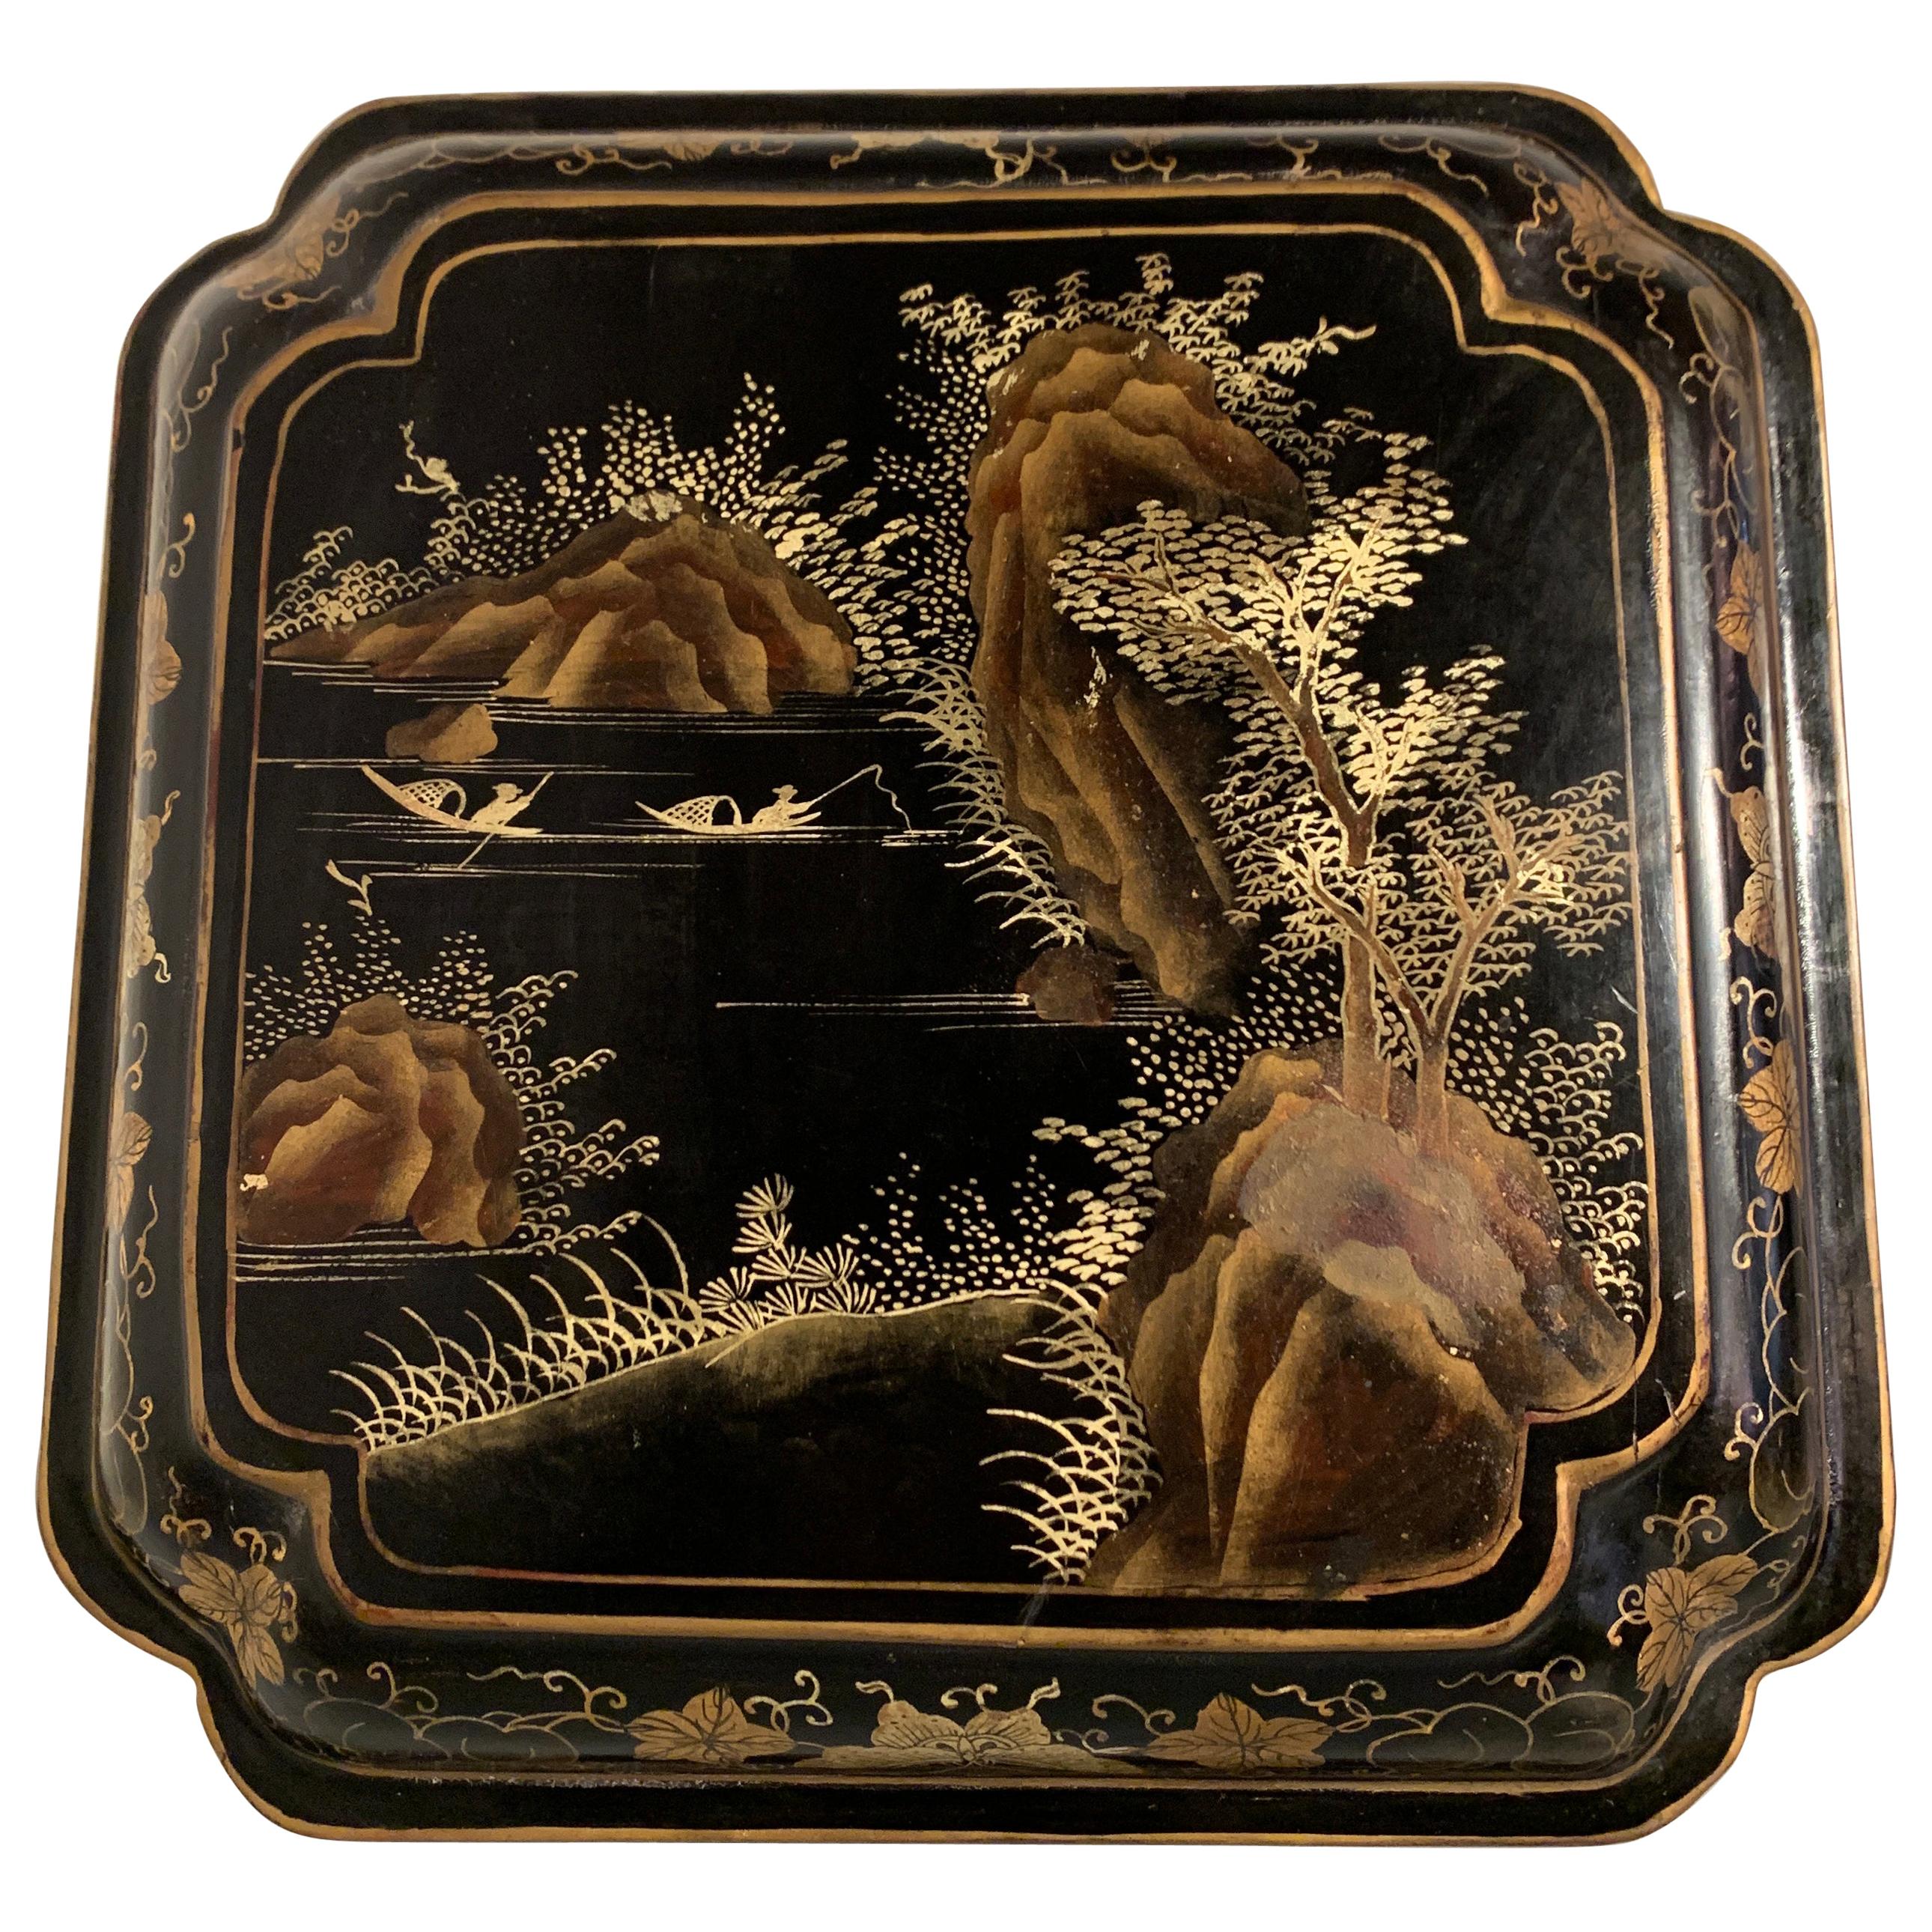 Chinese Export Black Lacquer Gilt Painted Box, Mid 20th Century, China